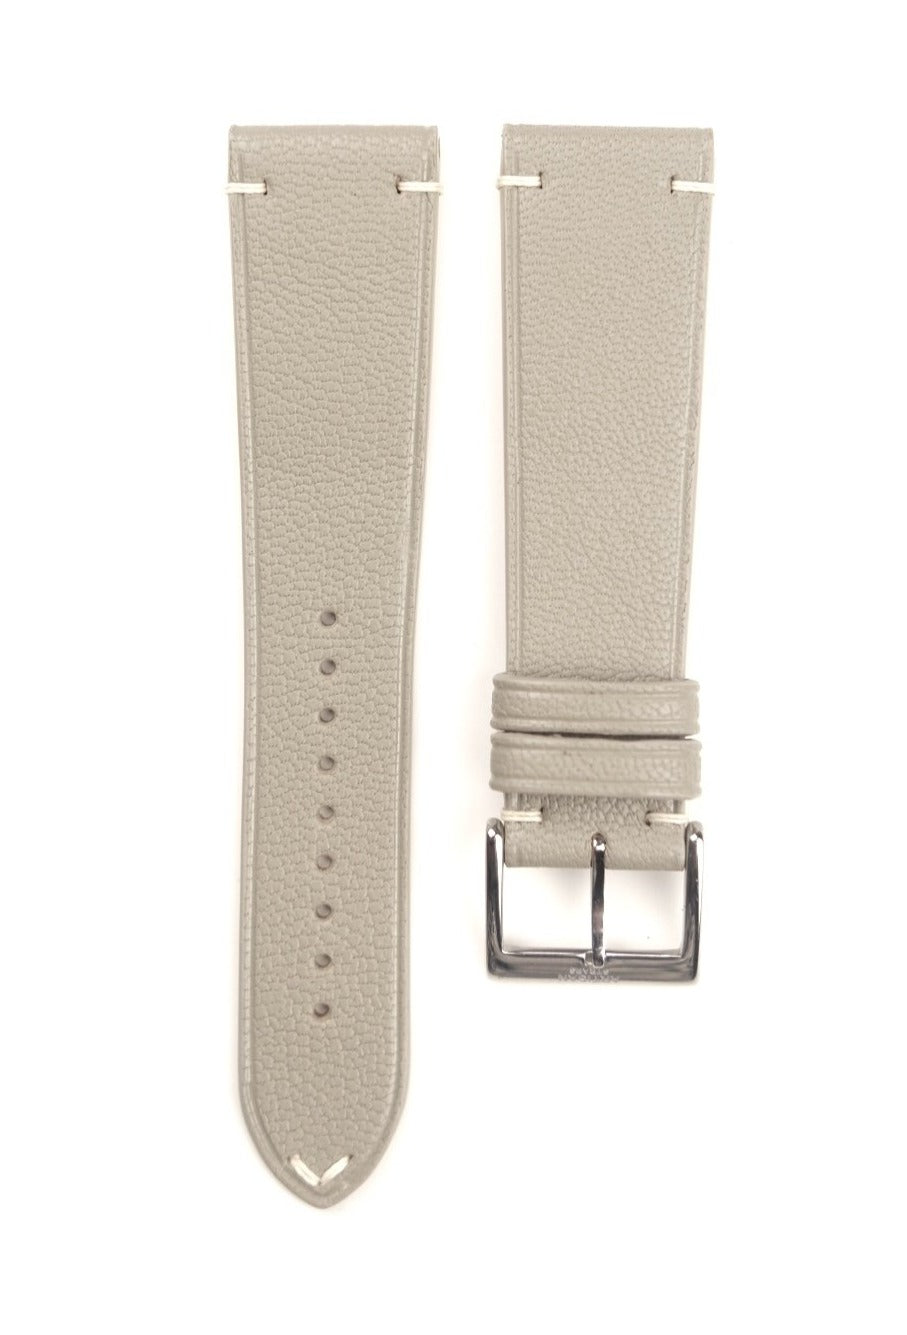 Chèvre (French Goat) Two-Stitch Leather Strap in Light Taupe - Artisan Straps